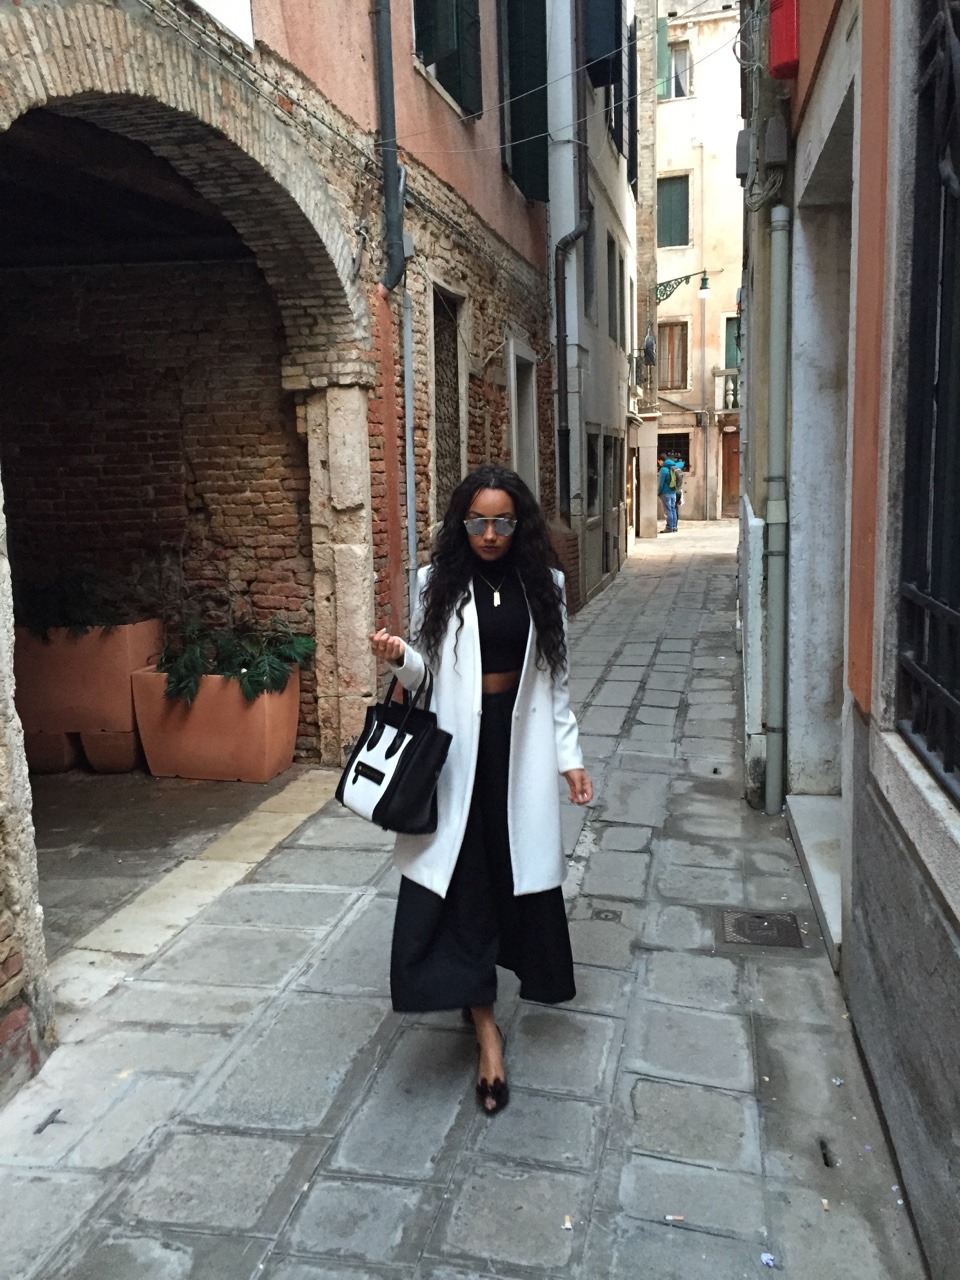 Monochrome in Venice

Monochrome is great for mix and matching your outfits and adding that extra sophisticated edge. 

Keeping it chic in the Venice lanes, wearing a Zara Over coat perfect for the colder months, Solace Cort Culottes 
Missguided top 
Vivienne Westwood peep toes
Celine Bag 
Dior sunglasses